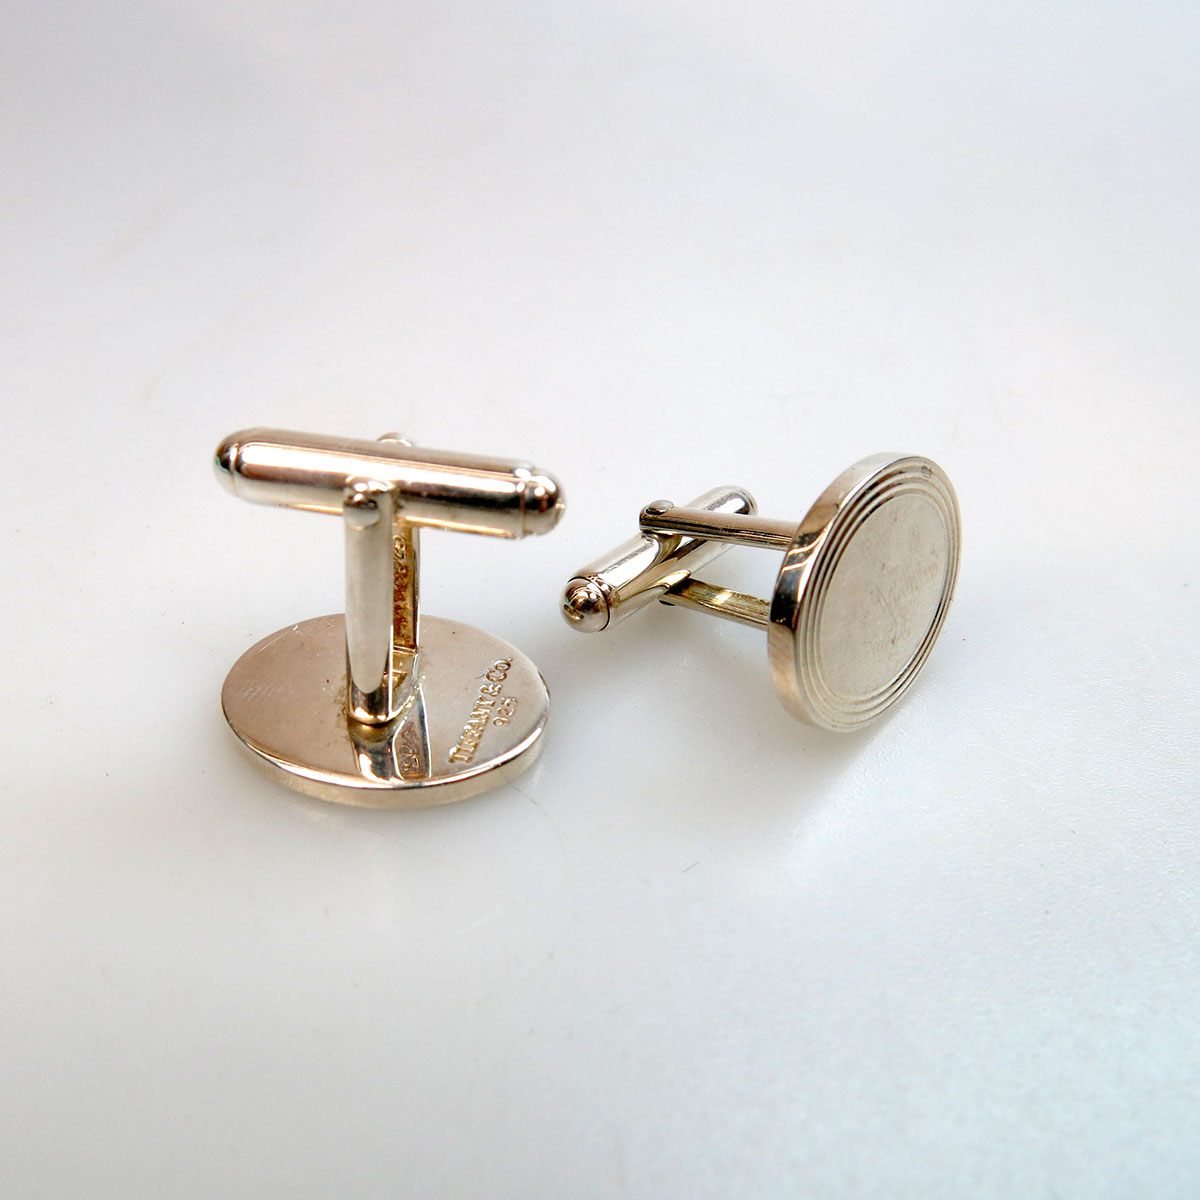 A Pair of Tiffany & Co. Sterling Silver Cufflinks